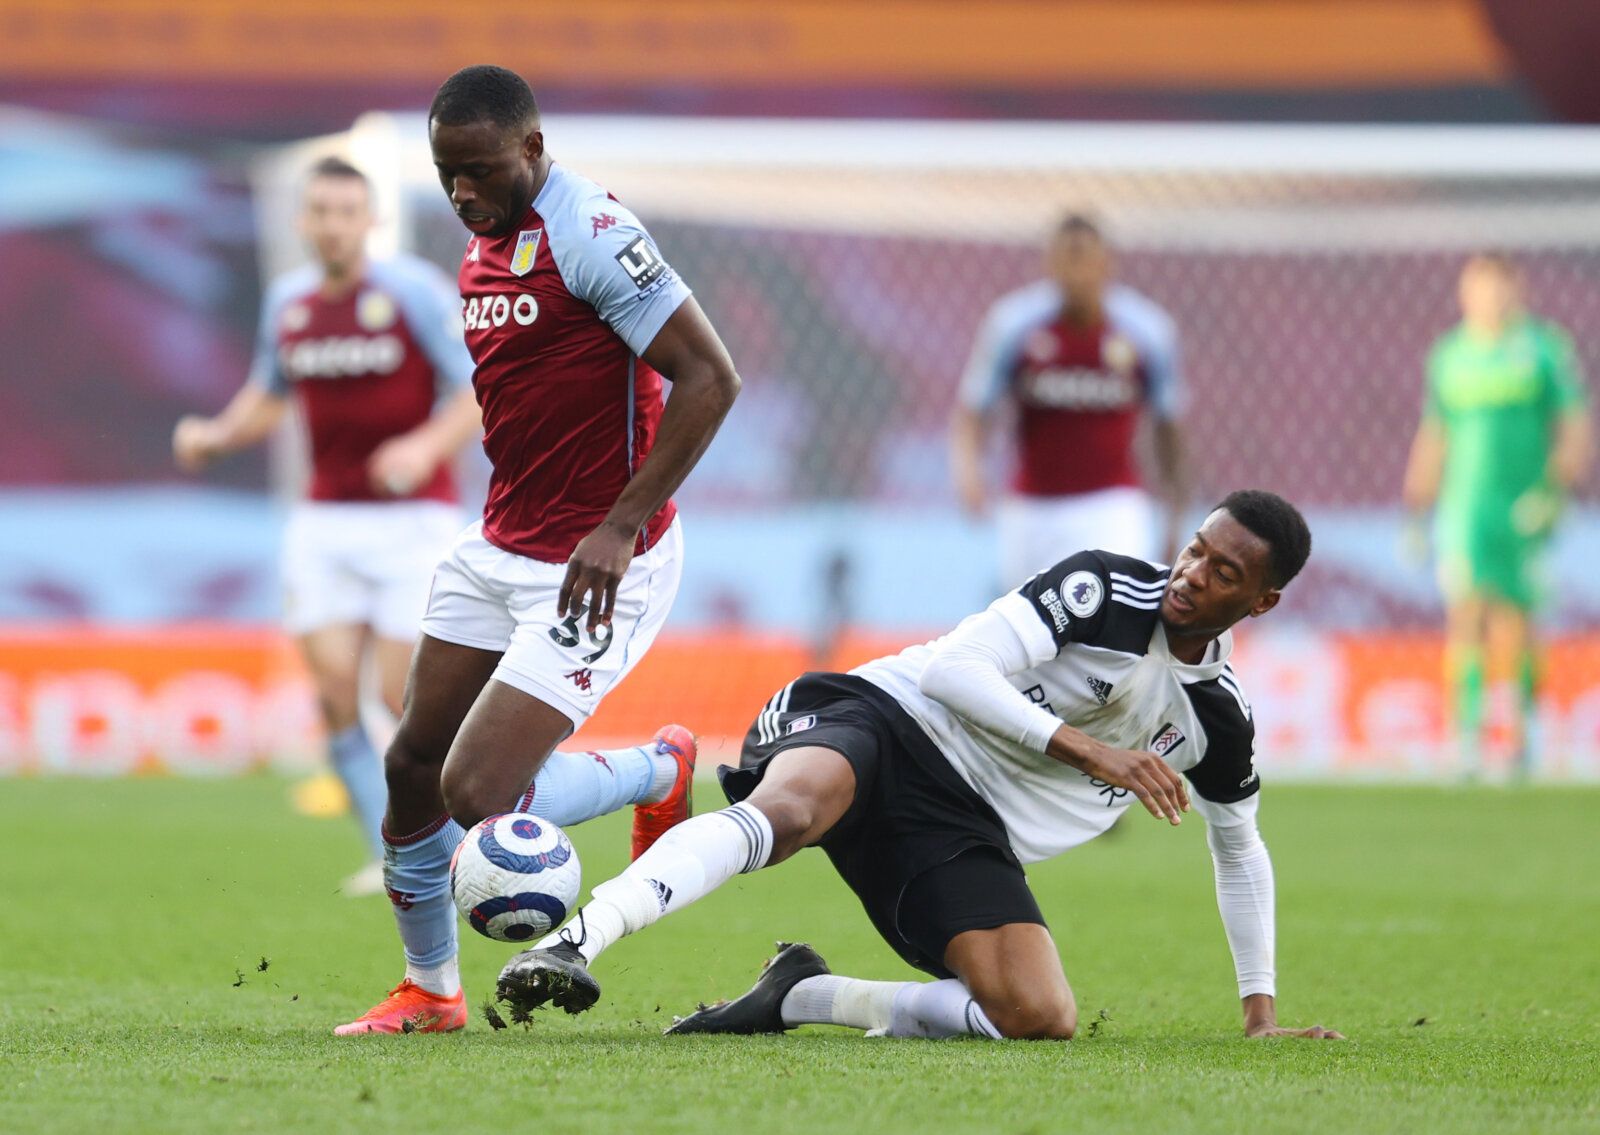 Soccer Football - Premier League - Aston Villa v Fulham - Villa Park, Birmingham, Britain - April 4, 2021 Aston Villa's Keinan Davis in action with Fulham's Tosin Adarabioyo Pool via REUTERS/Richard Heathcote EDITORIAL USE ONLY. No use with unauthorized audio, video, data, fixture lists, club/league logos or 'live' services. Online in-match use limited to 75 images, no video emulation. No use in betting, games or single club /league/player publications.  Please contact your account representativ